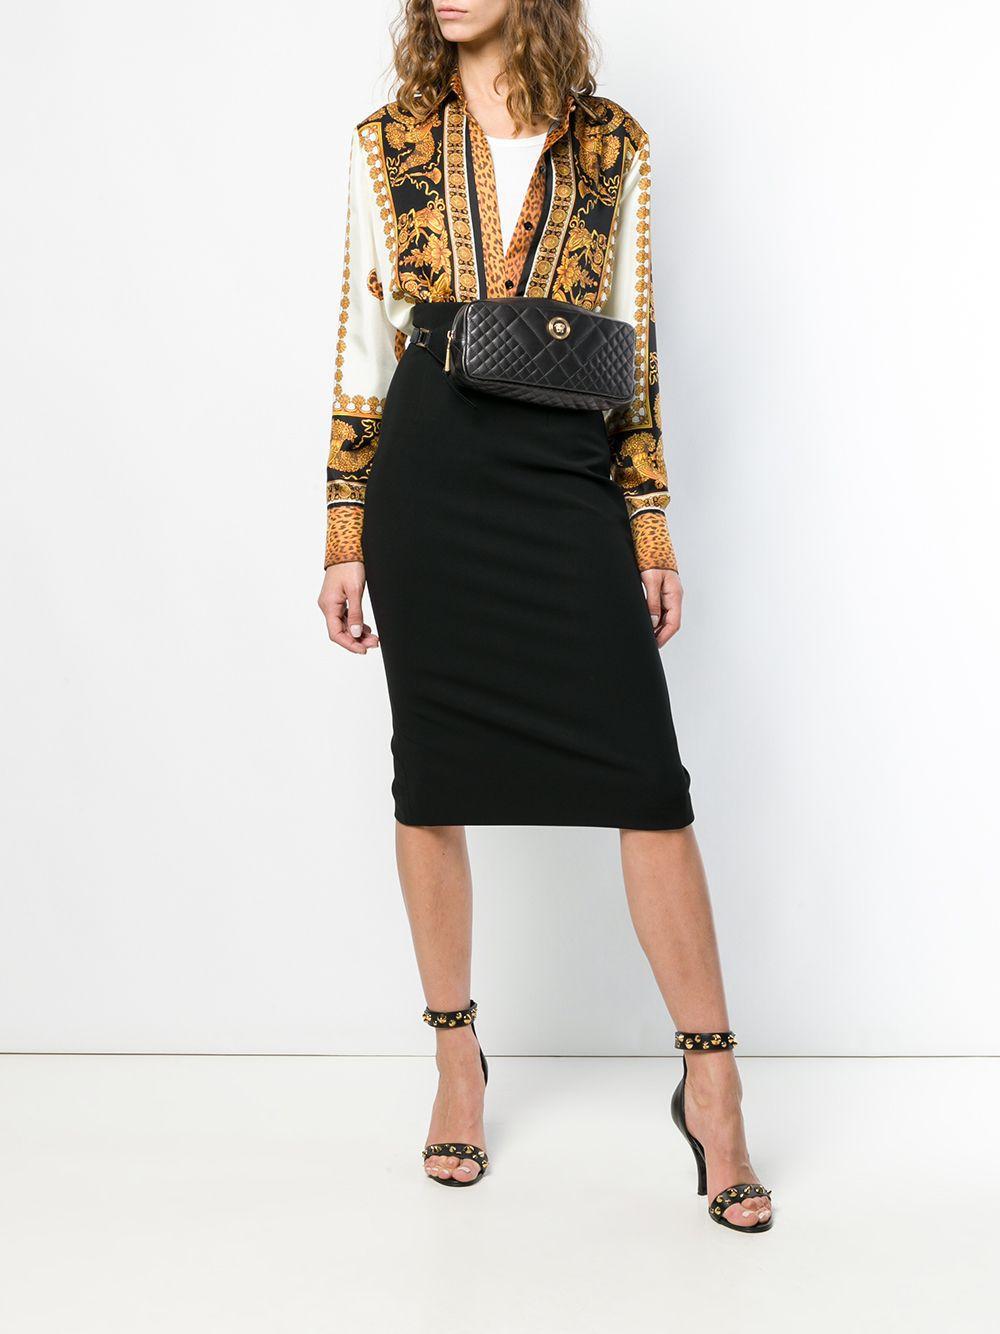 Versace SS19 Black Tribute Icon Quilted Leather Belt Bag

A pillar of luxury Italian fashion since its founding in 1978, Versace is celebrated for their glamorous details and impeccable craftsmanship which carries seamlessly onto their accessory